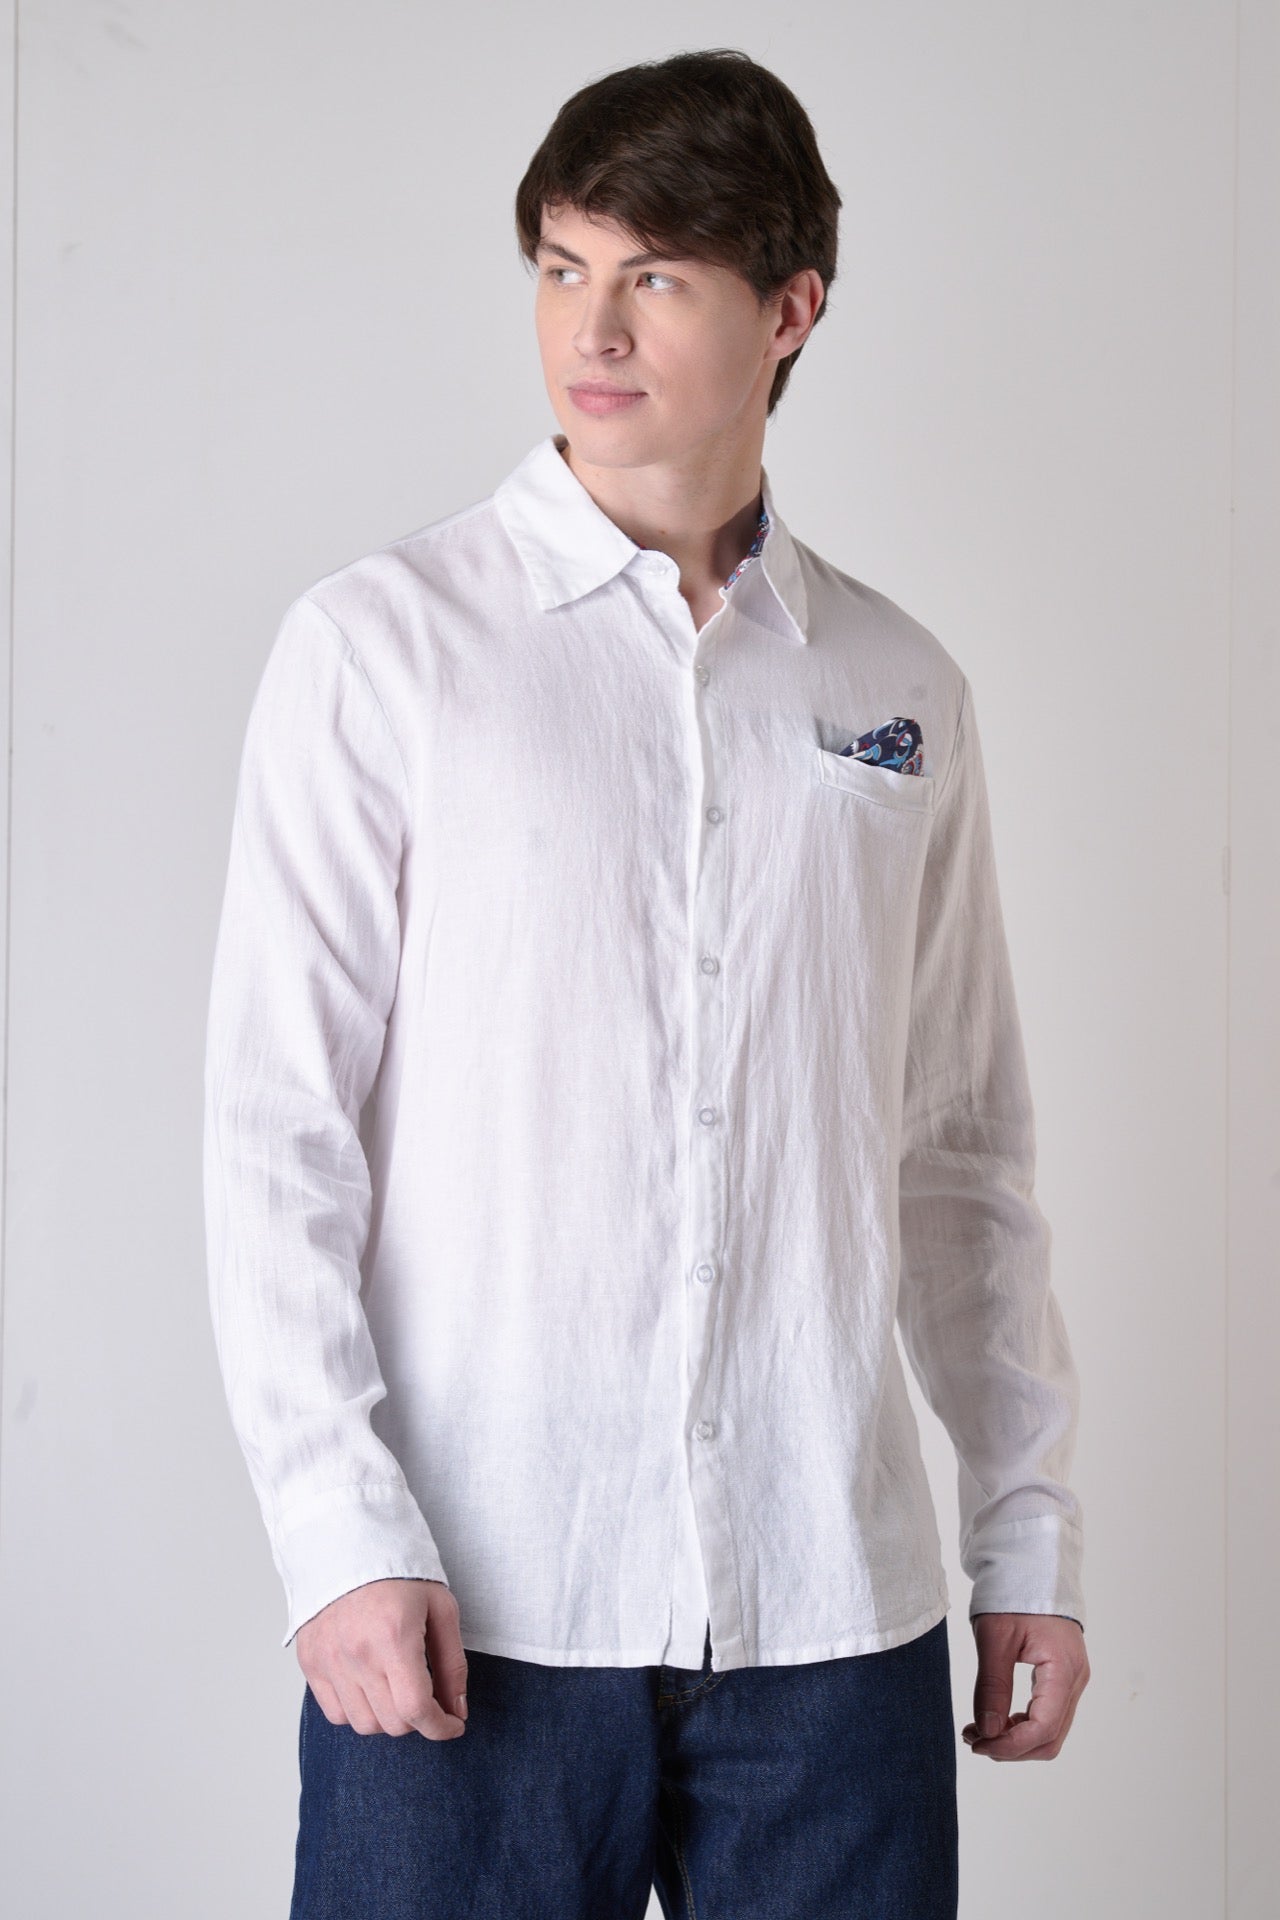 Tailored shirt in white linen with pocket square, interior and cuffs in V2 fabric